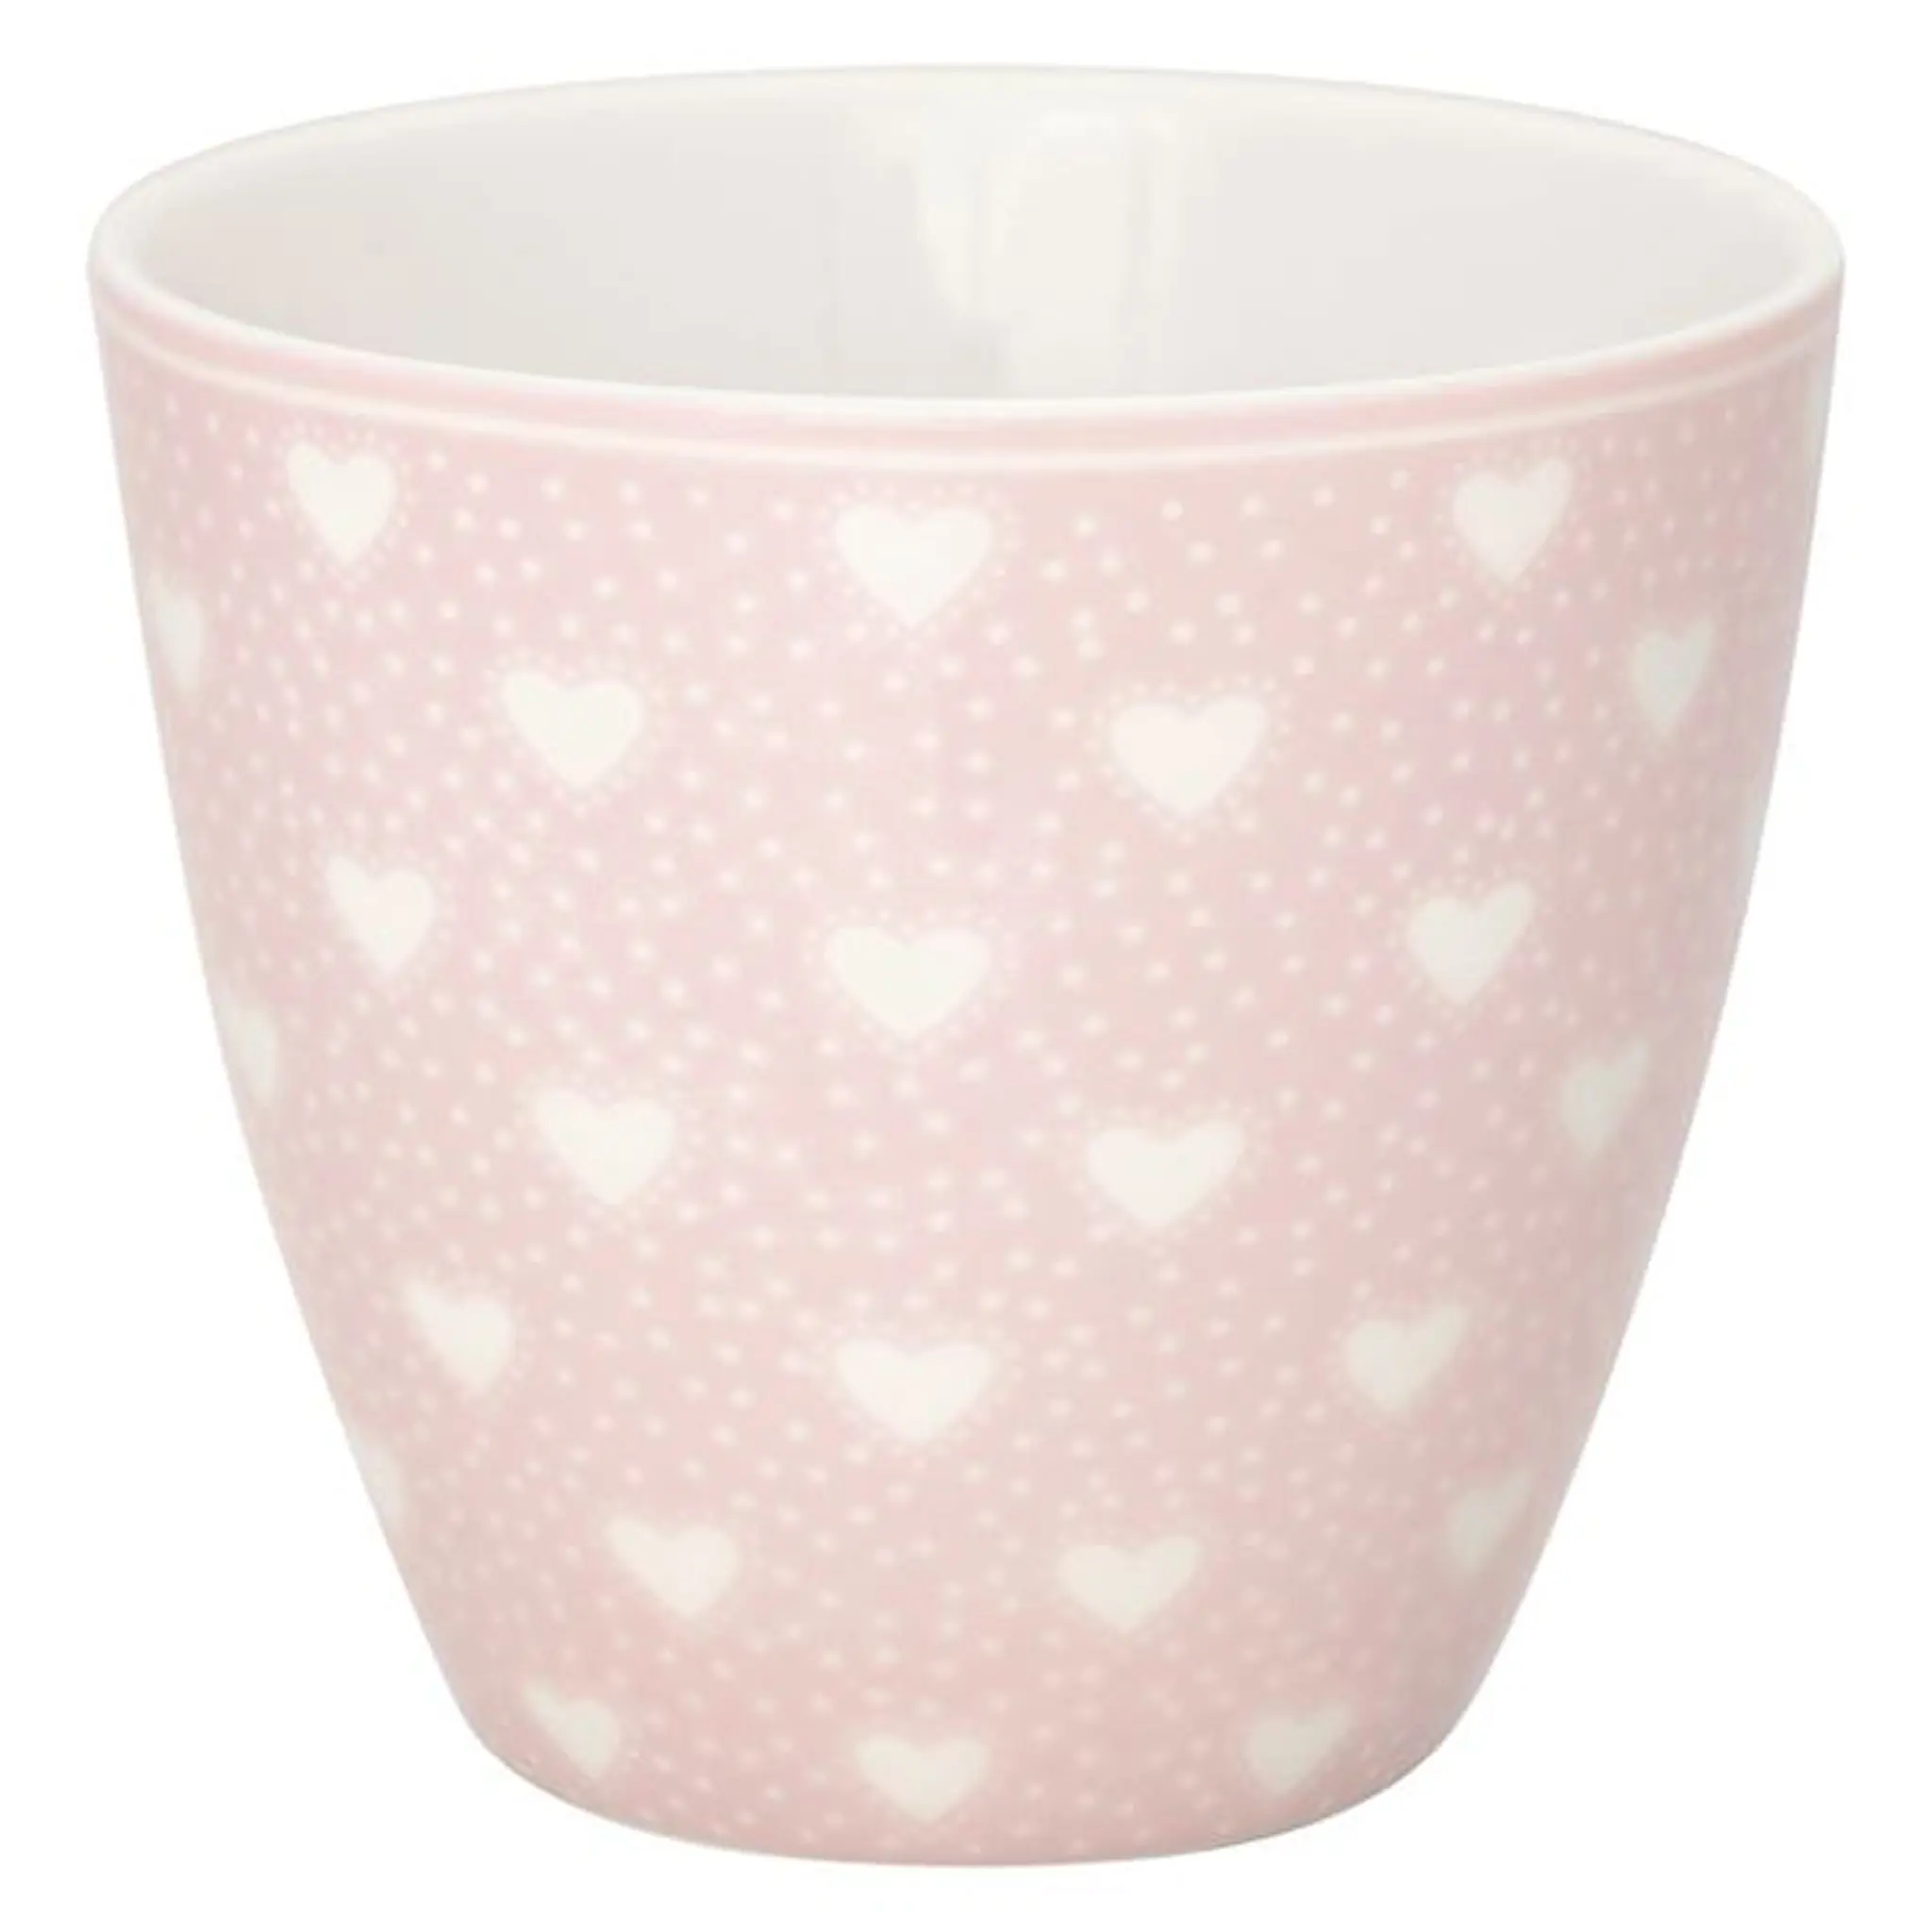 GreenGate Penny Lattemugg 35 cl Pale Pink